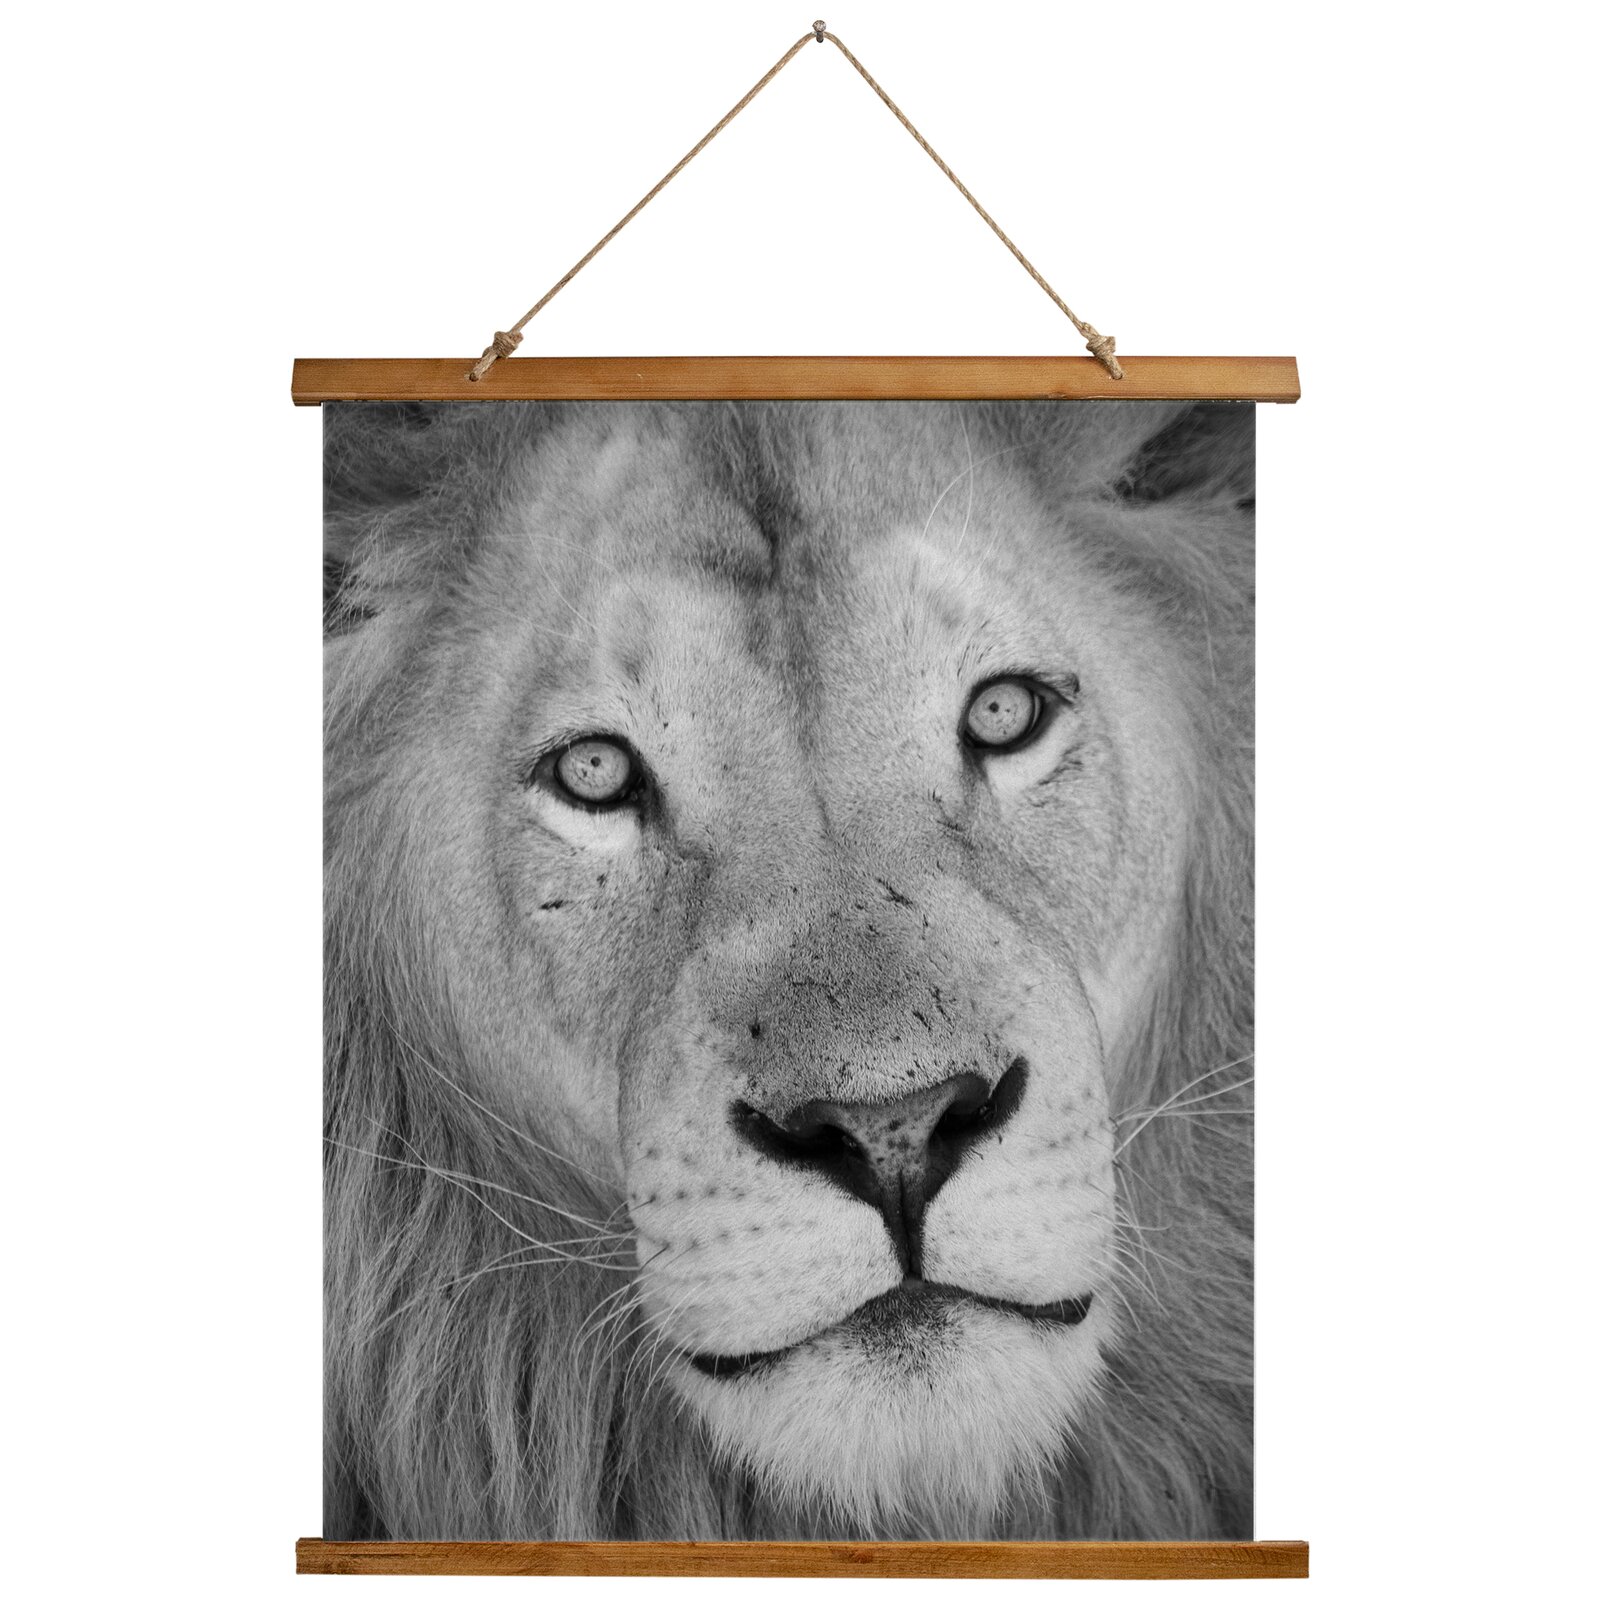 Lion Wall Decorations - Microfiber Lion Tapestry